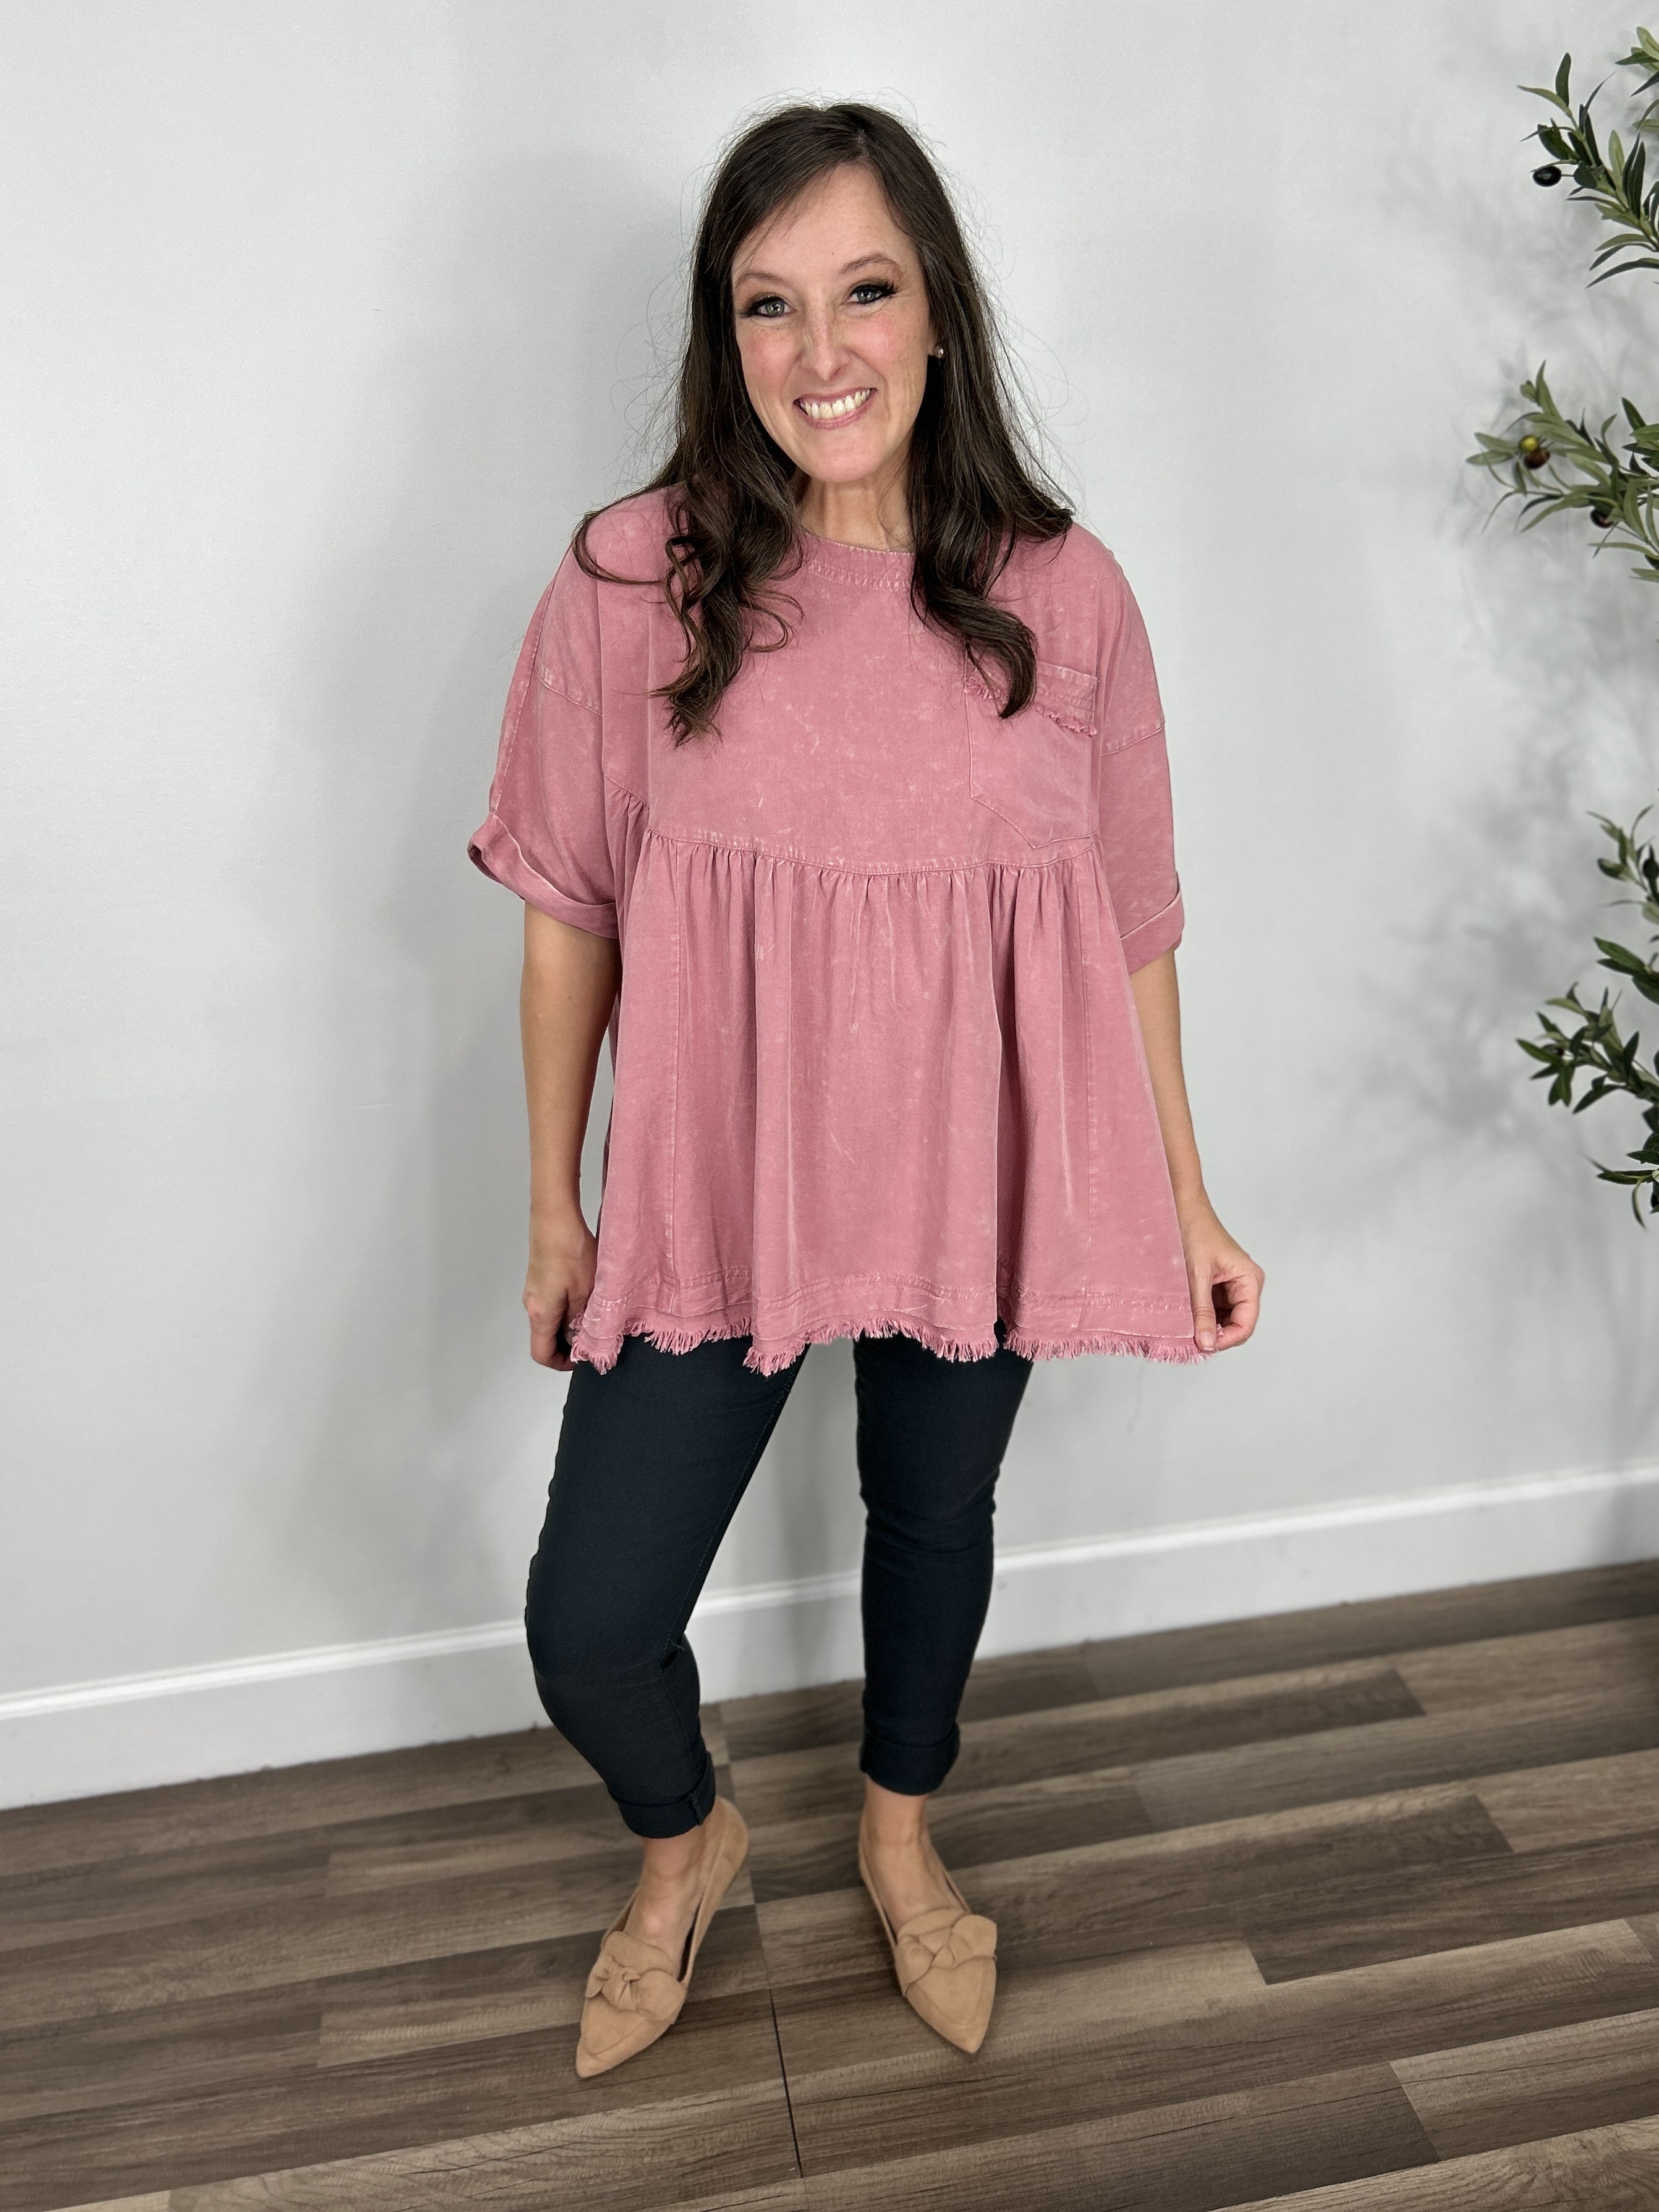 Women's mineral wash pink short sleeve oversized babydoll top paired with charcoal skinny jeans and paired with camel color flat shoes.